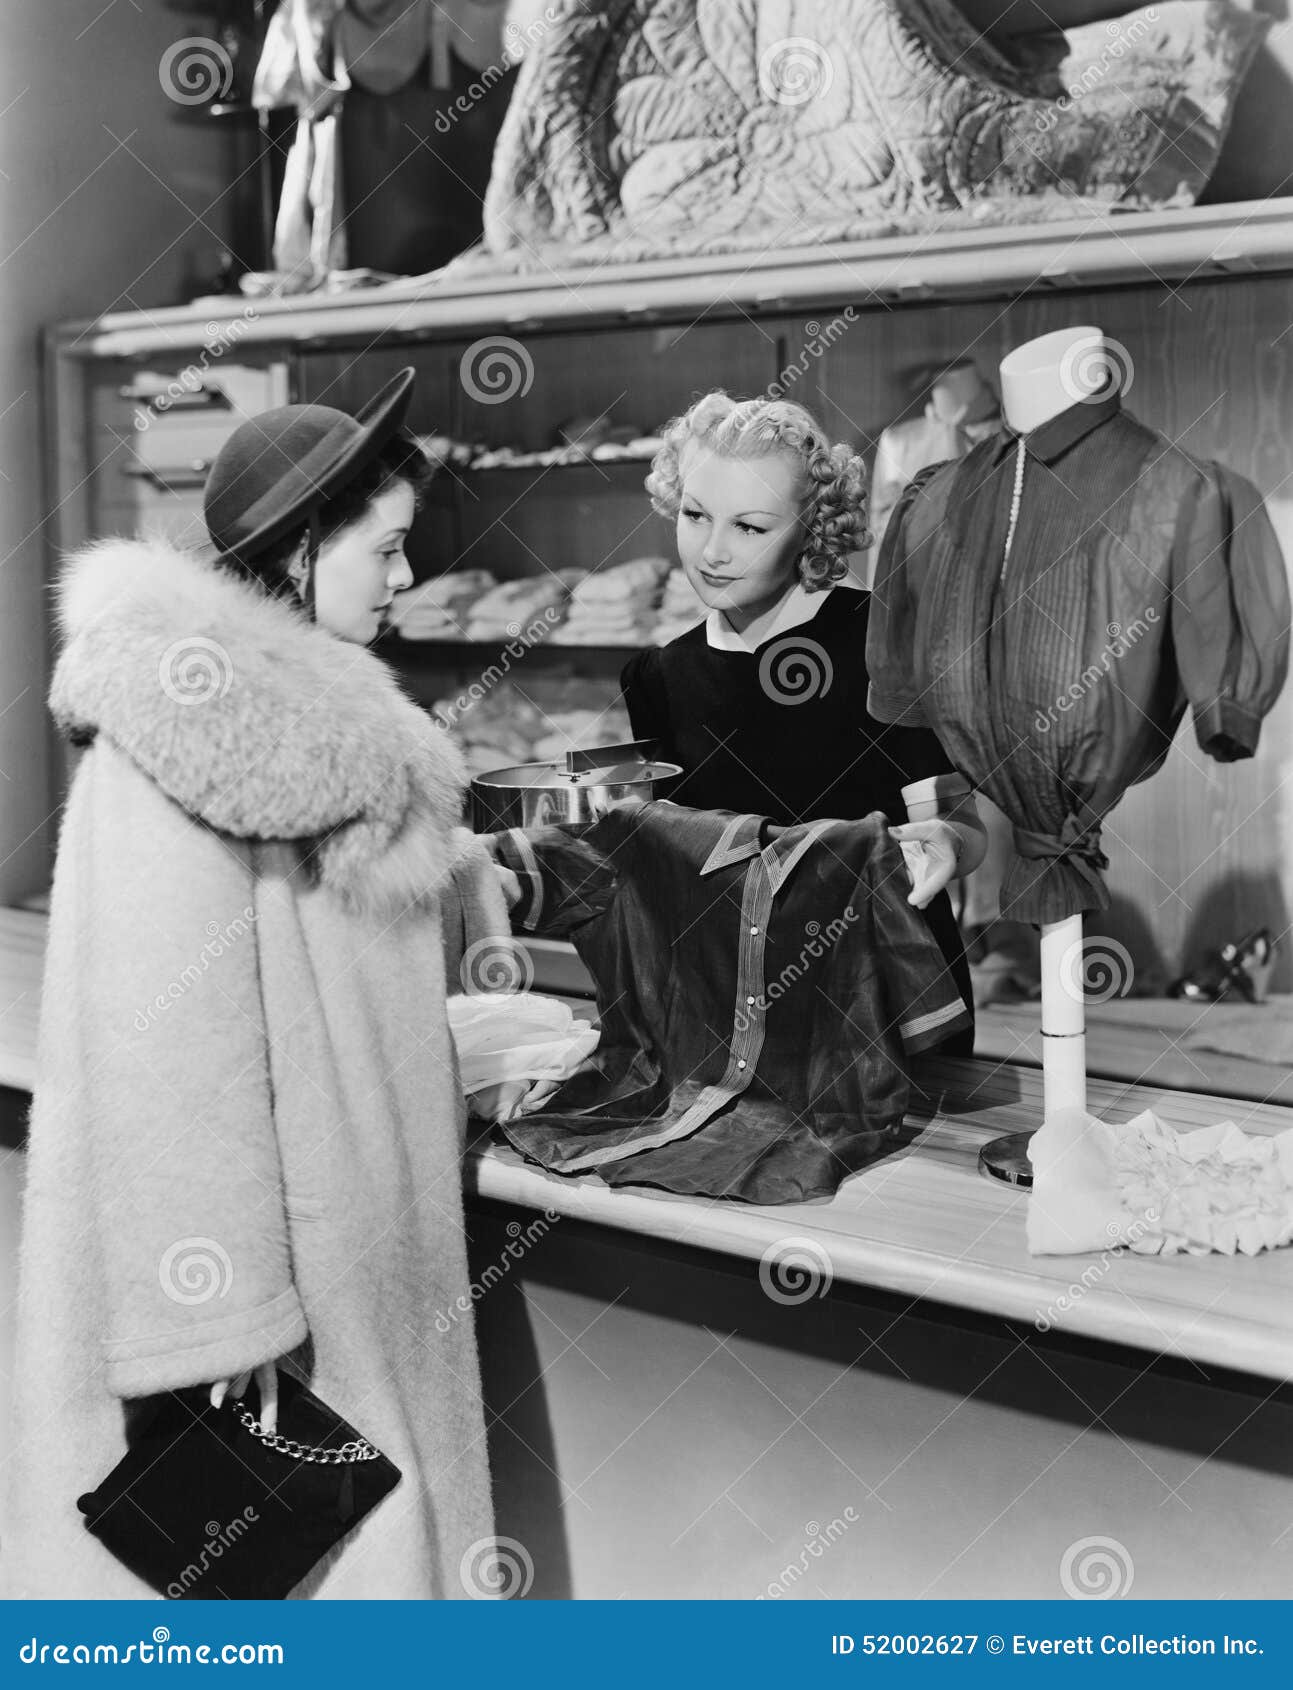 customer and clerk in clothing store